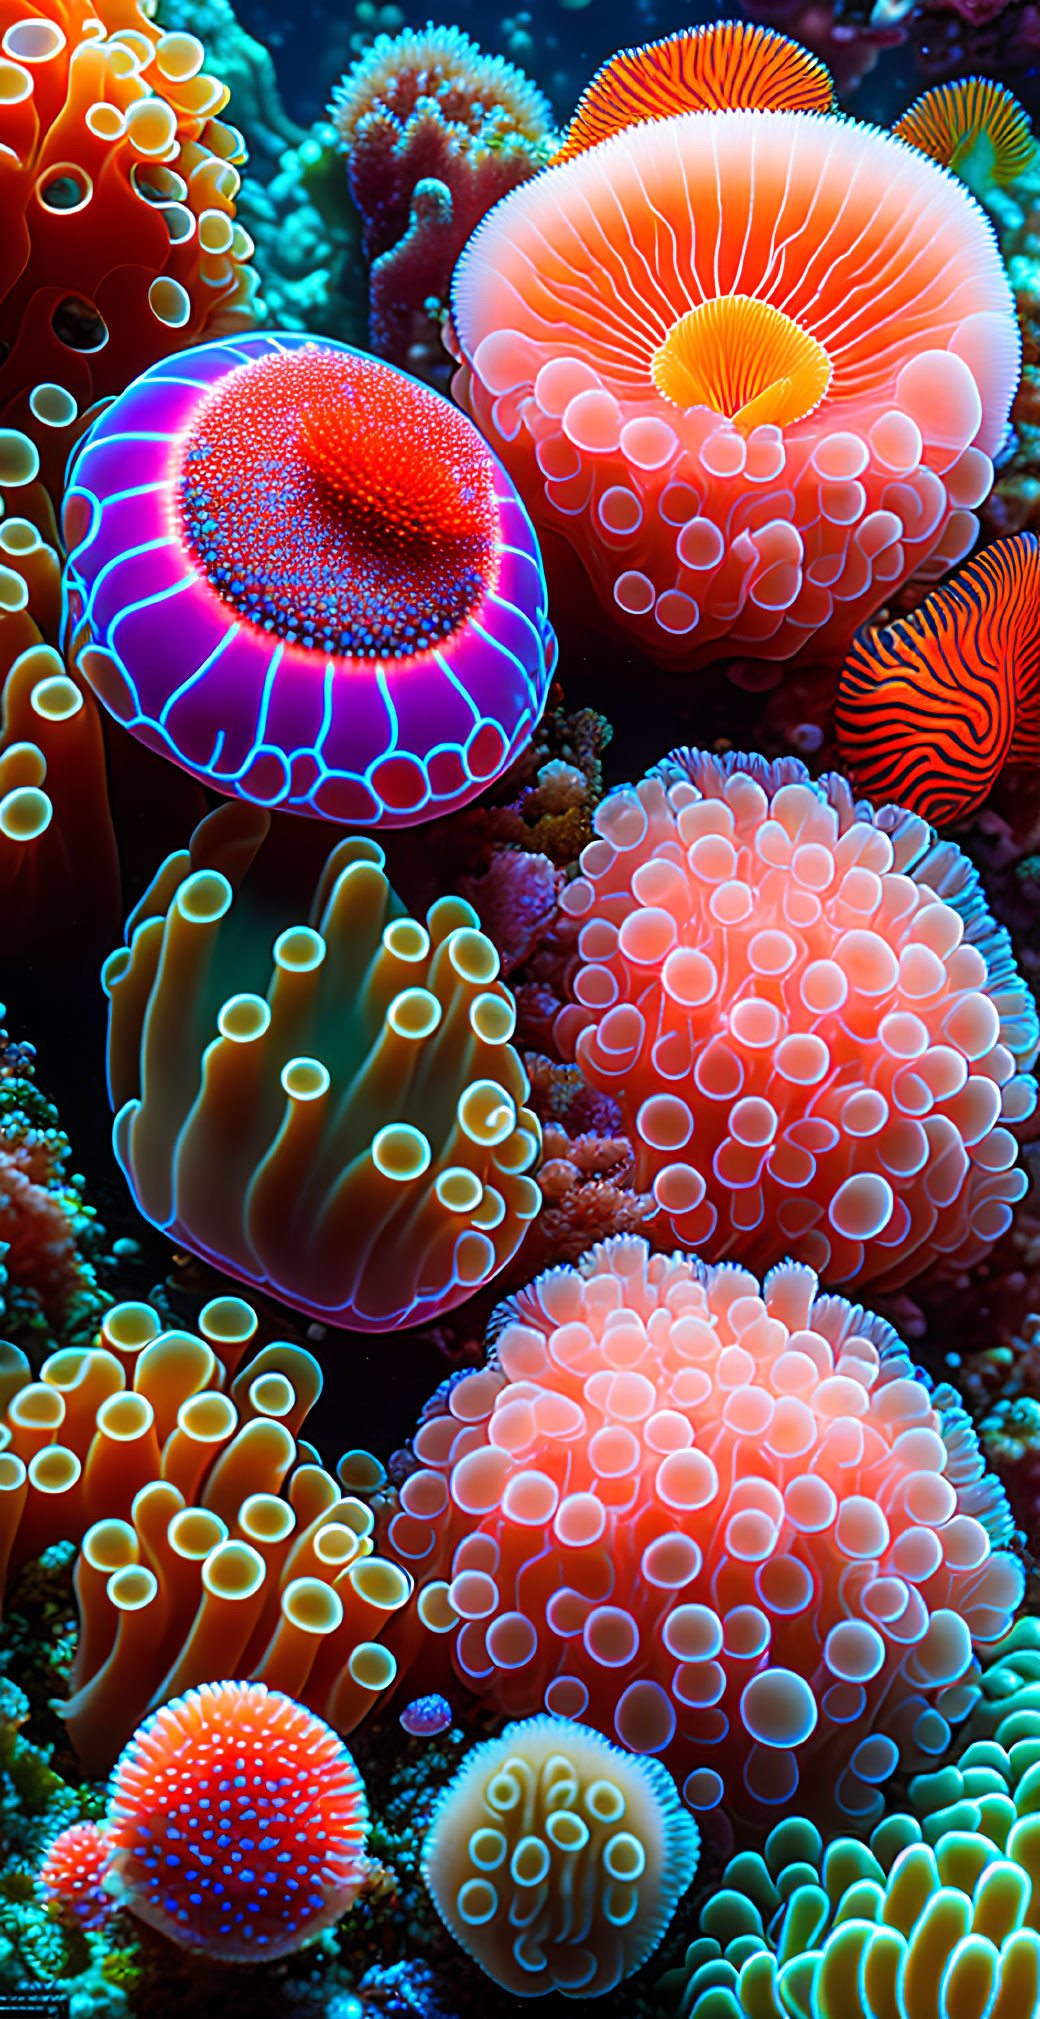 Colorful Coral Reef with Anemones and Corals in Various Patterns